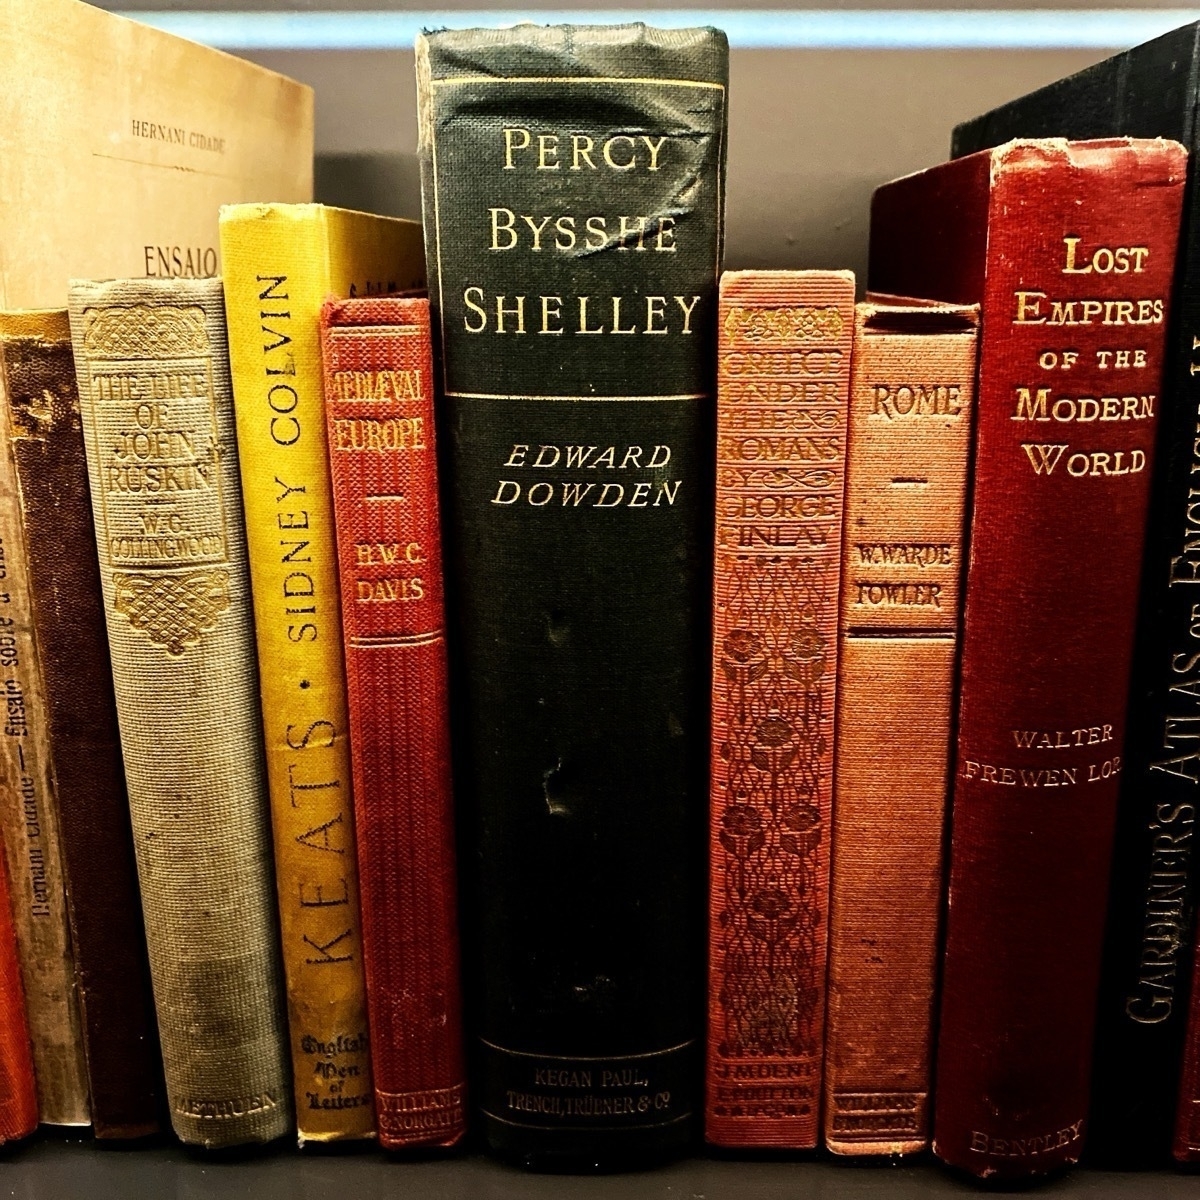 A collection of old books with worn spines on a bookshelf, including works by Percy Bysshe Shelley and John Keats